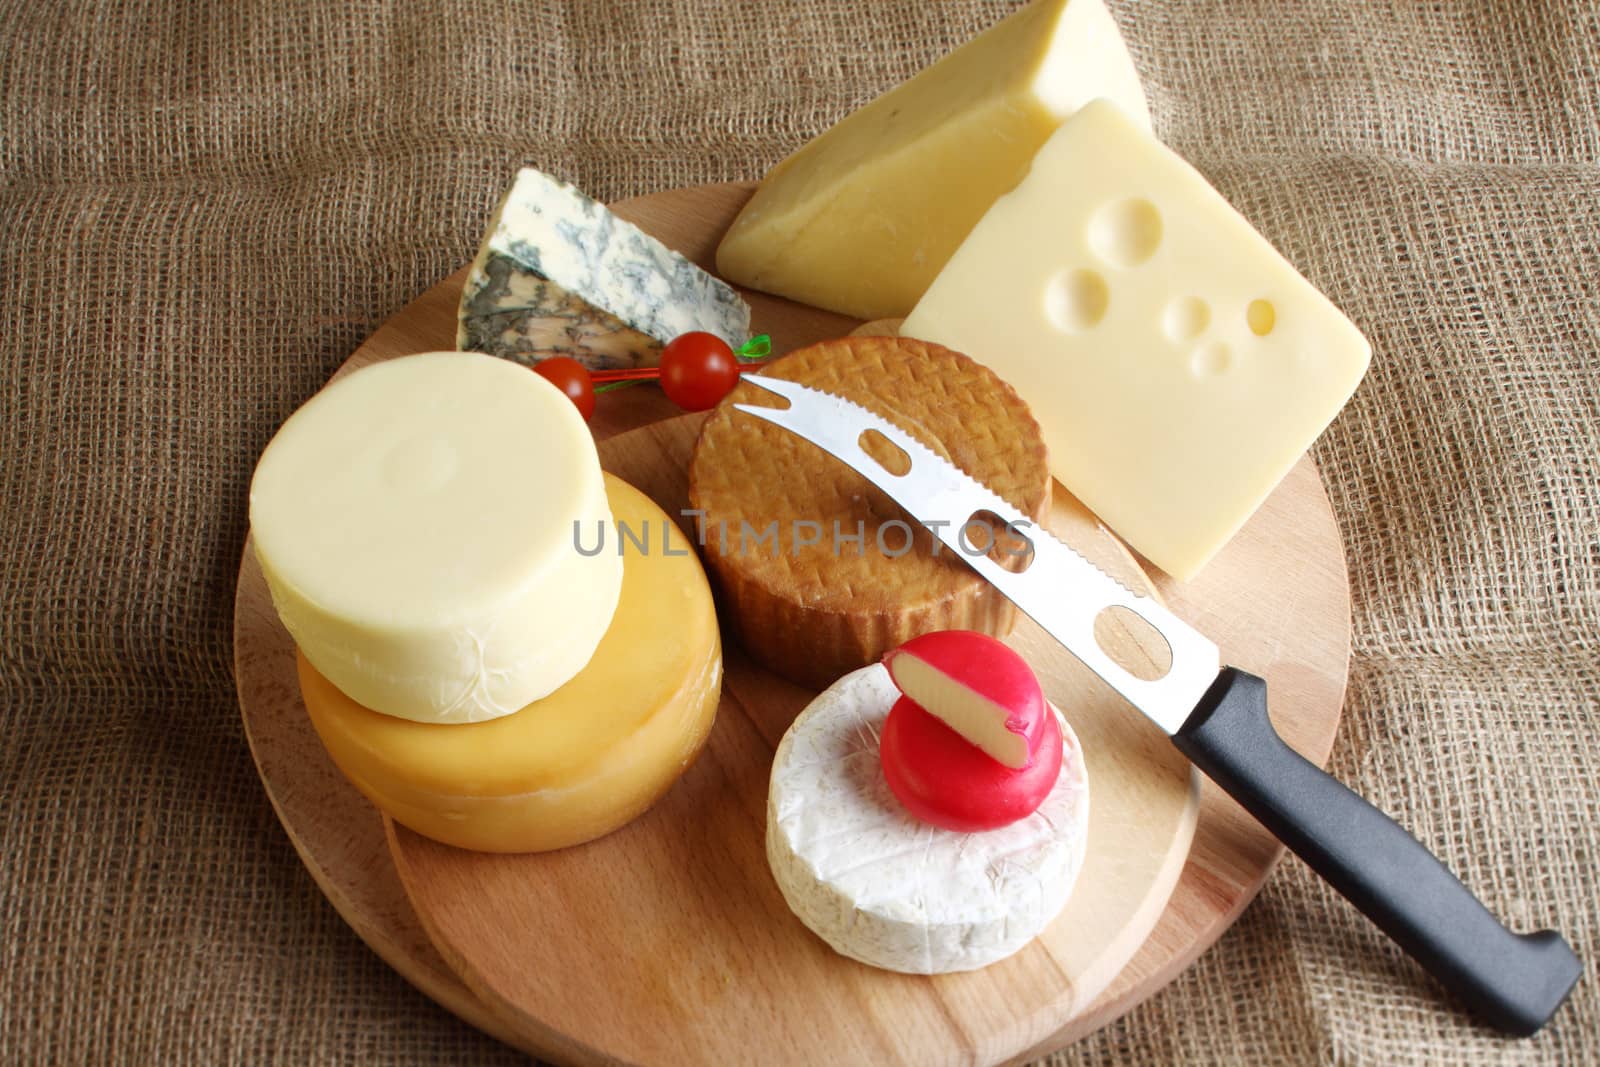 Several types of cheese and knife close up